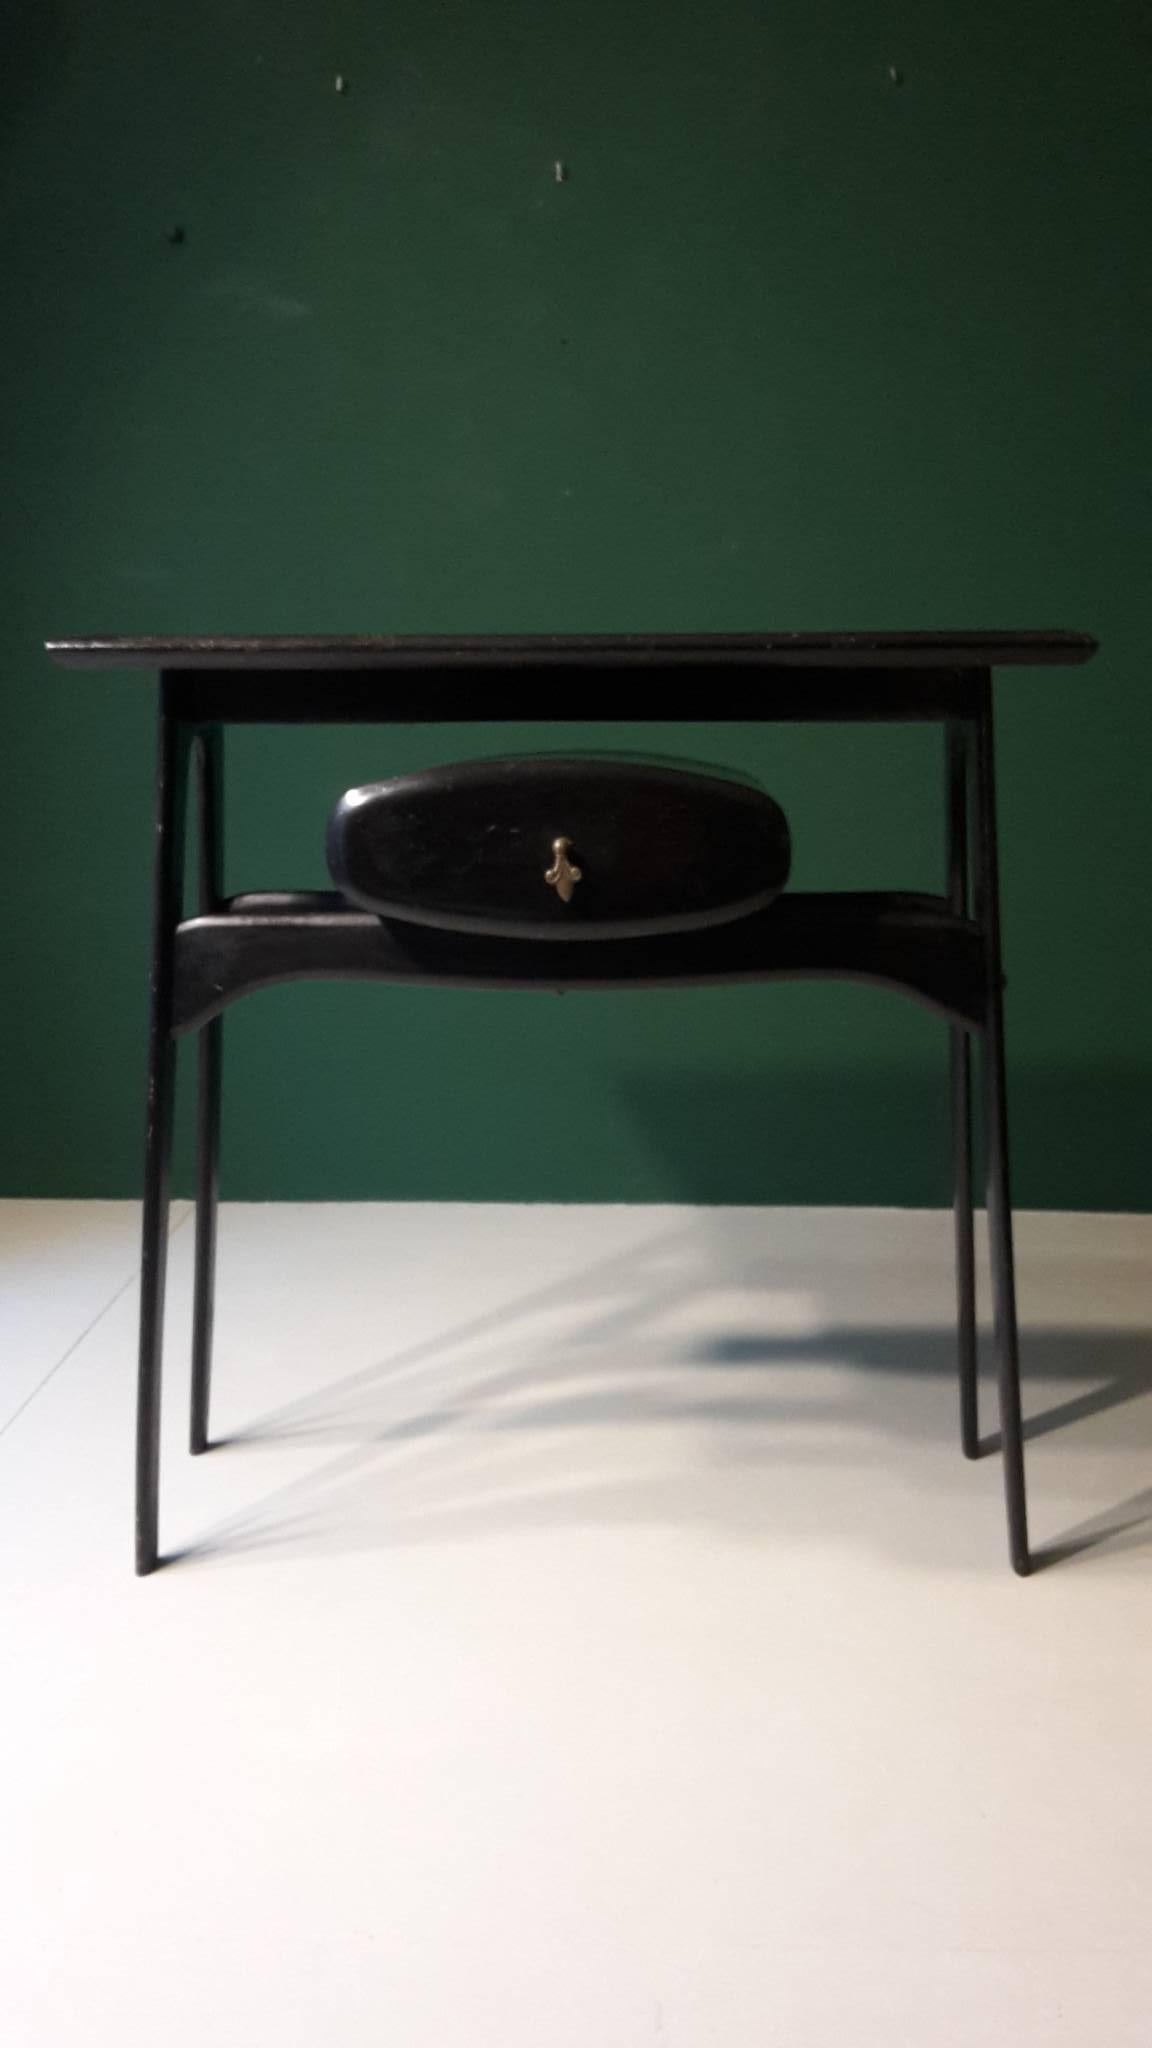 20th century black Italian console made of wood and glass from the 1960s.